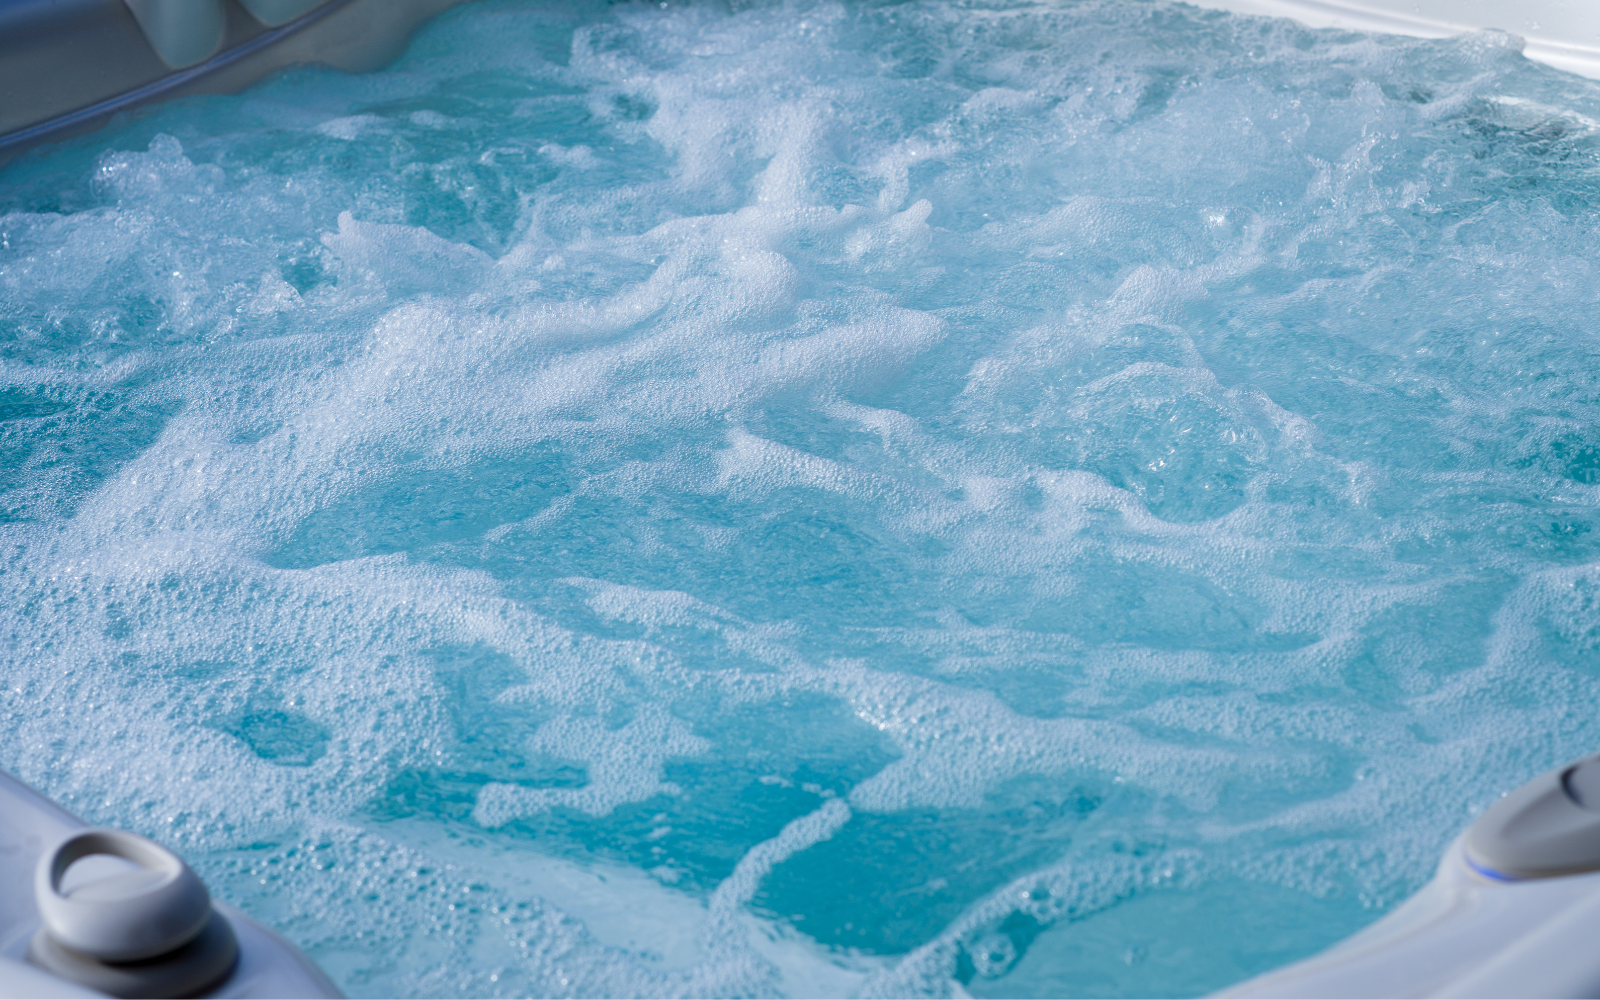 Bubbly water swirls in a hot tub, a feature often found on liveaboards but should not be used directly after exiting a dive